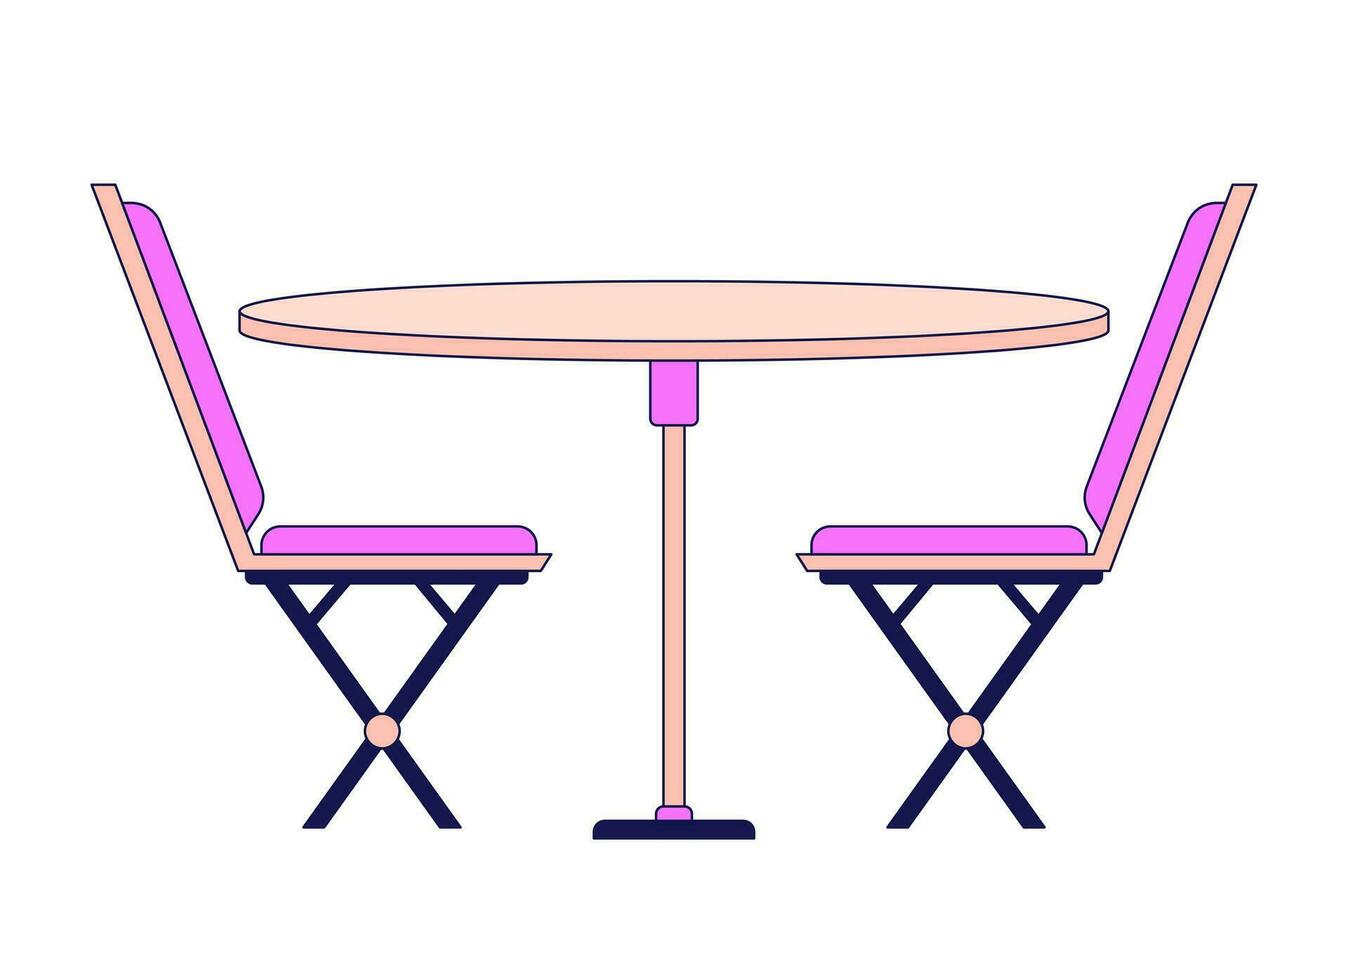 Chairs with dining table flat line color isolated vector object. Cafe table setting. Furniture. Editable clip art image on white background. Simple outline cartoon spot illustration for web design